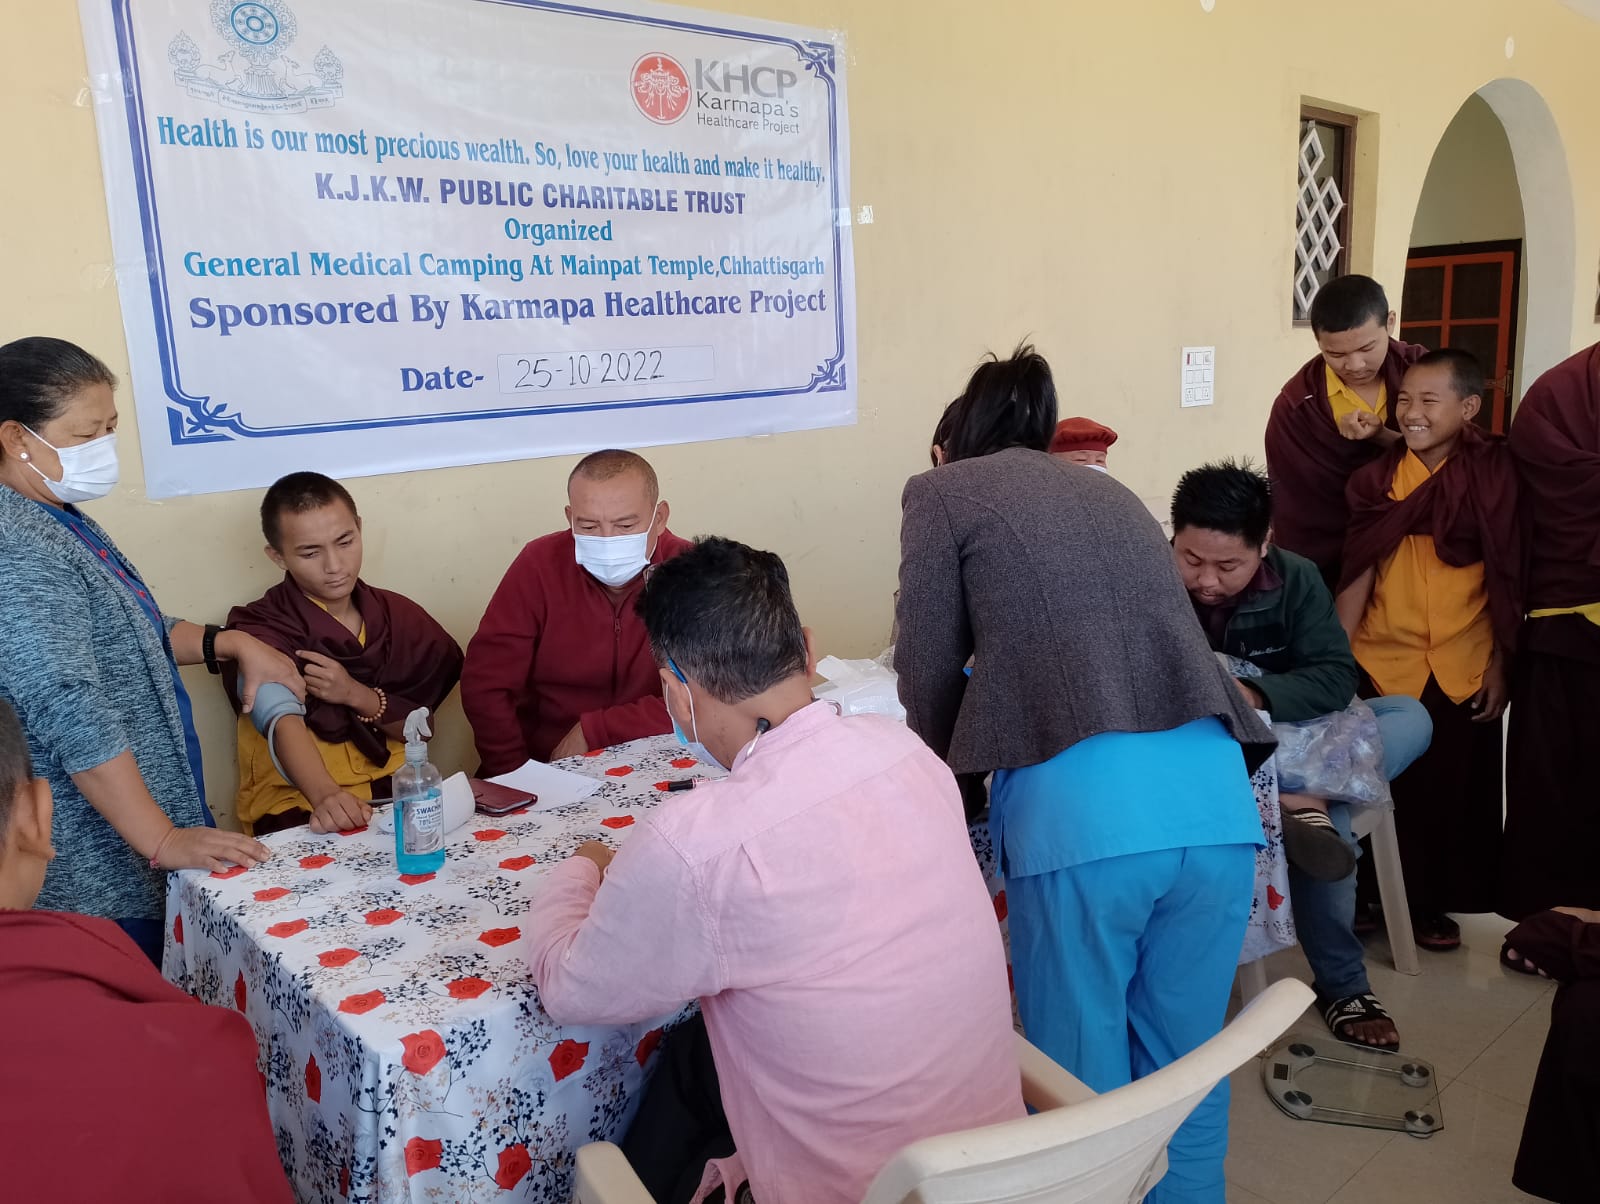 COVID-19 KHCP Medicalcamp at MainpatTemple